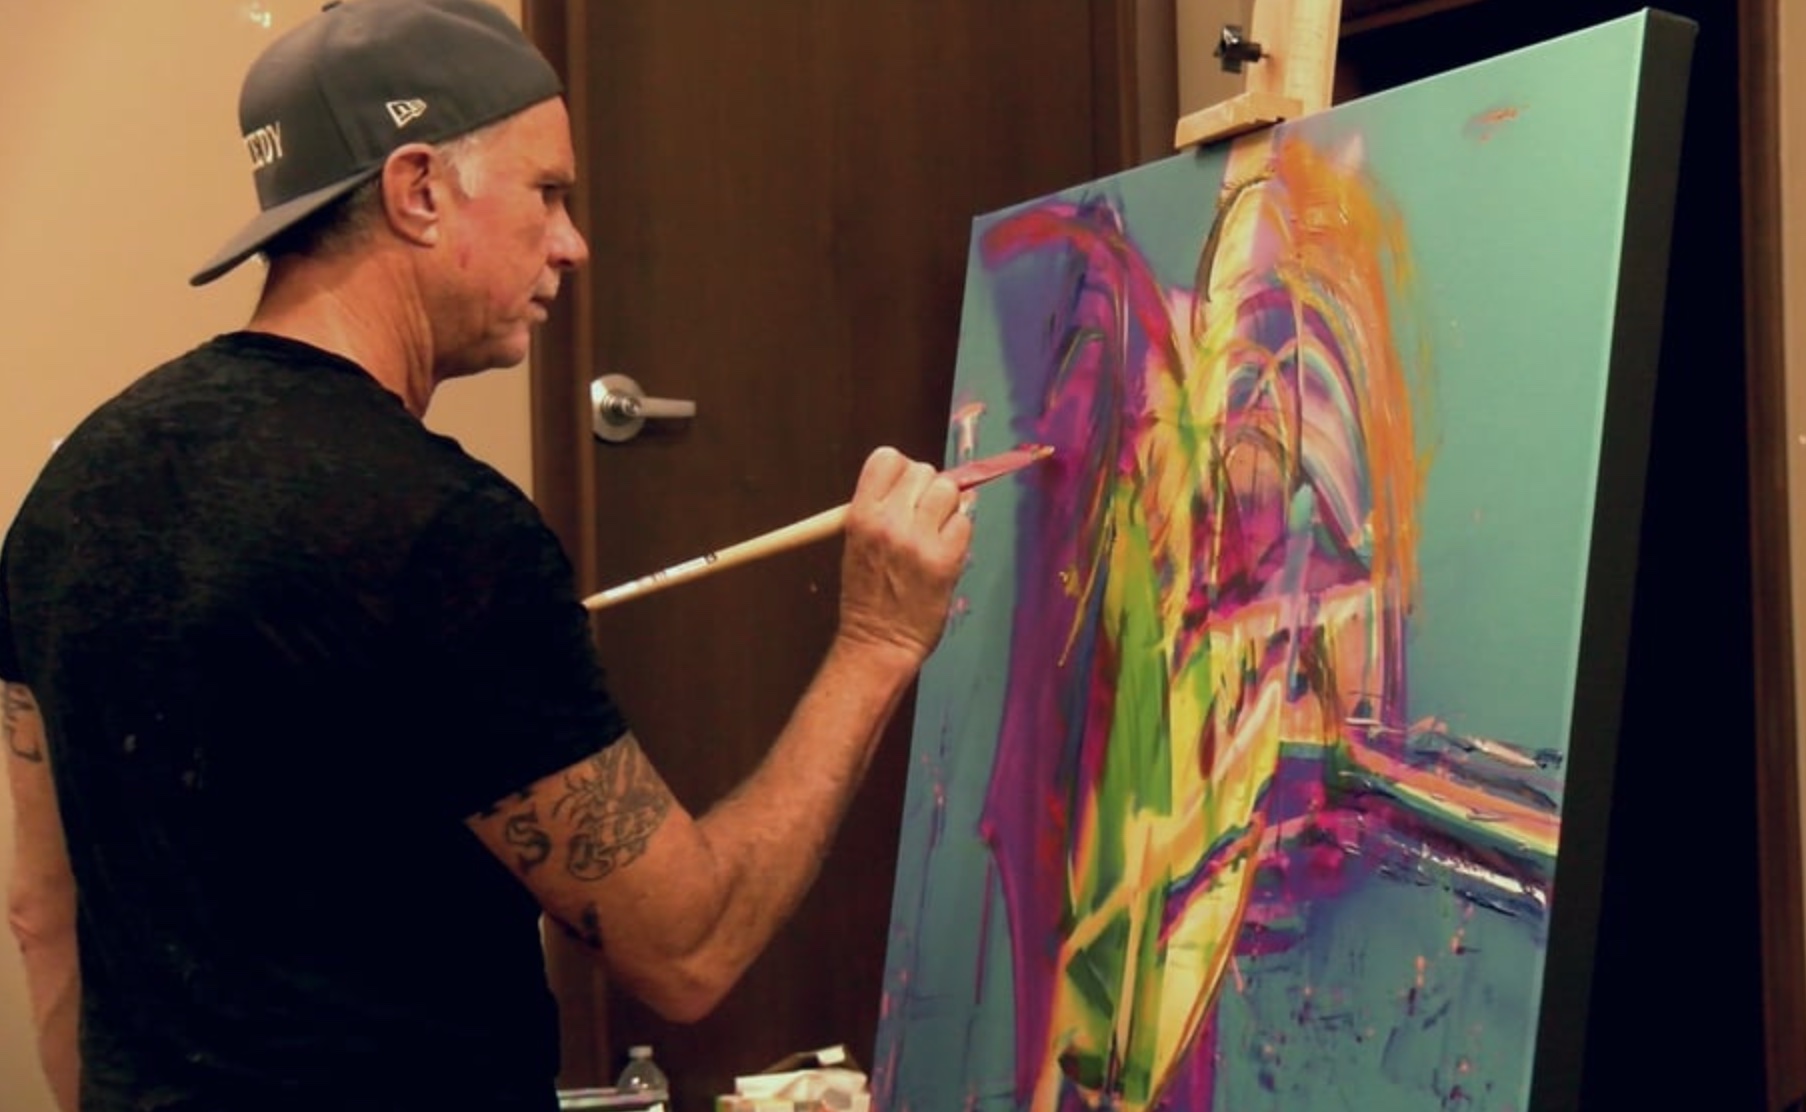 Punk Rock & Paintbrushes To Display Original Artwork Galleries At Summerfest This June Lead By Red Hot Chili Peppers Chad Smith